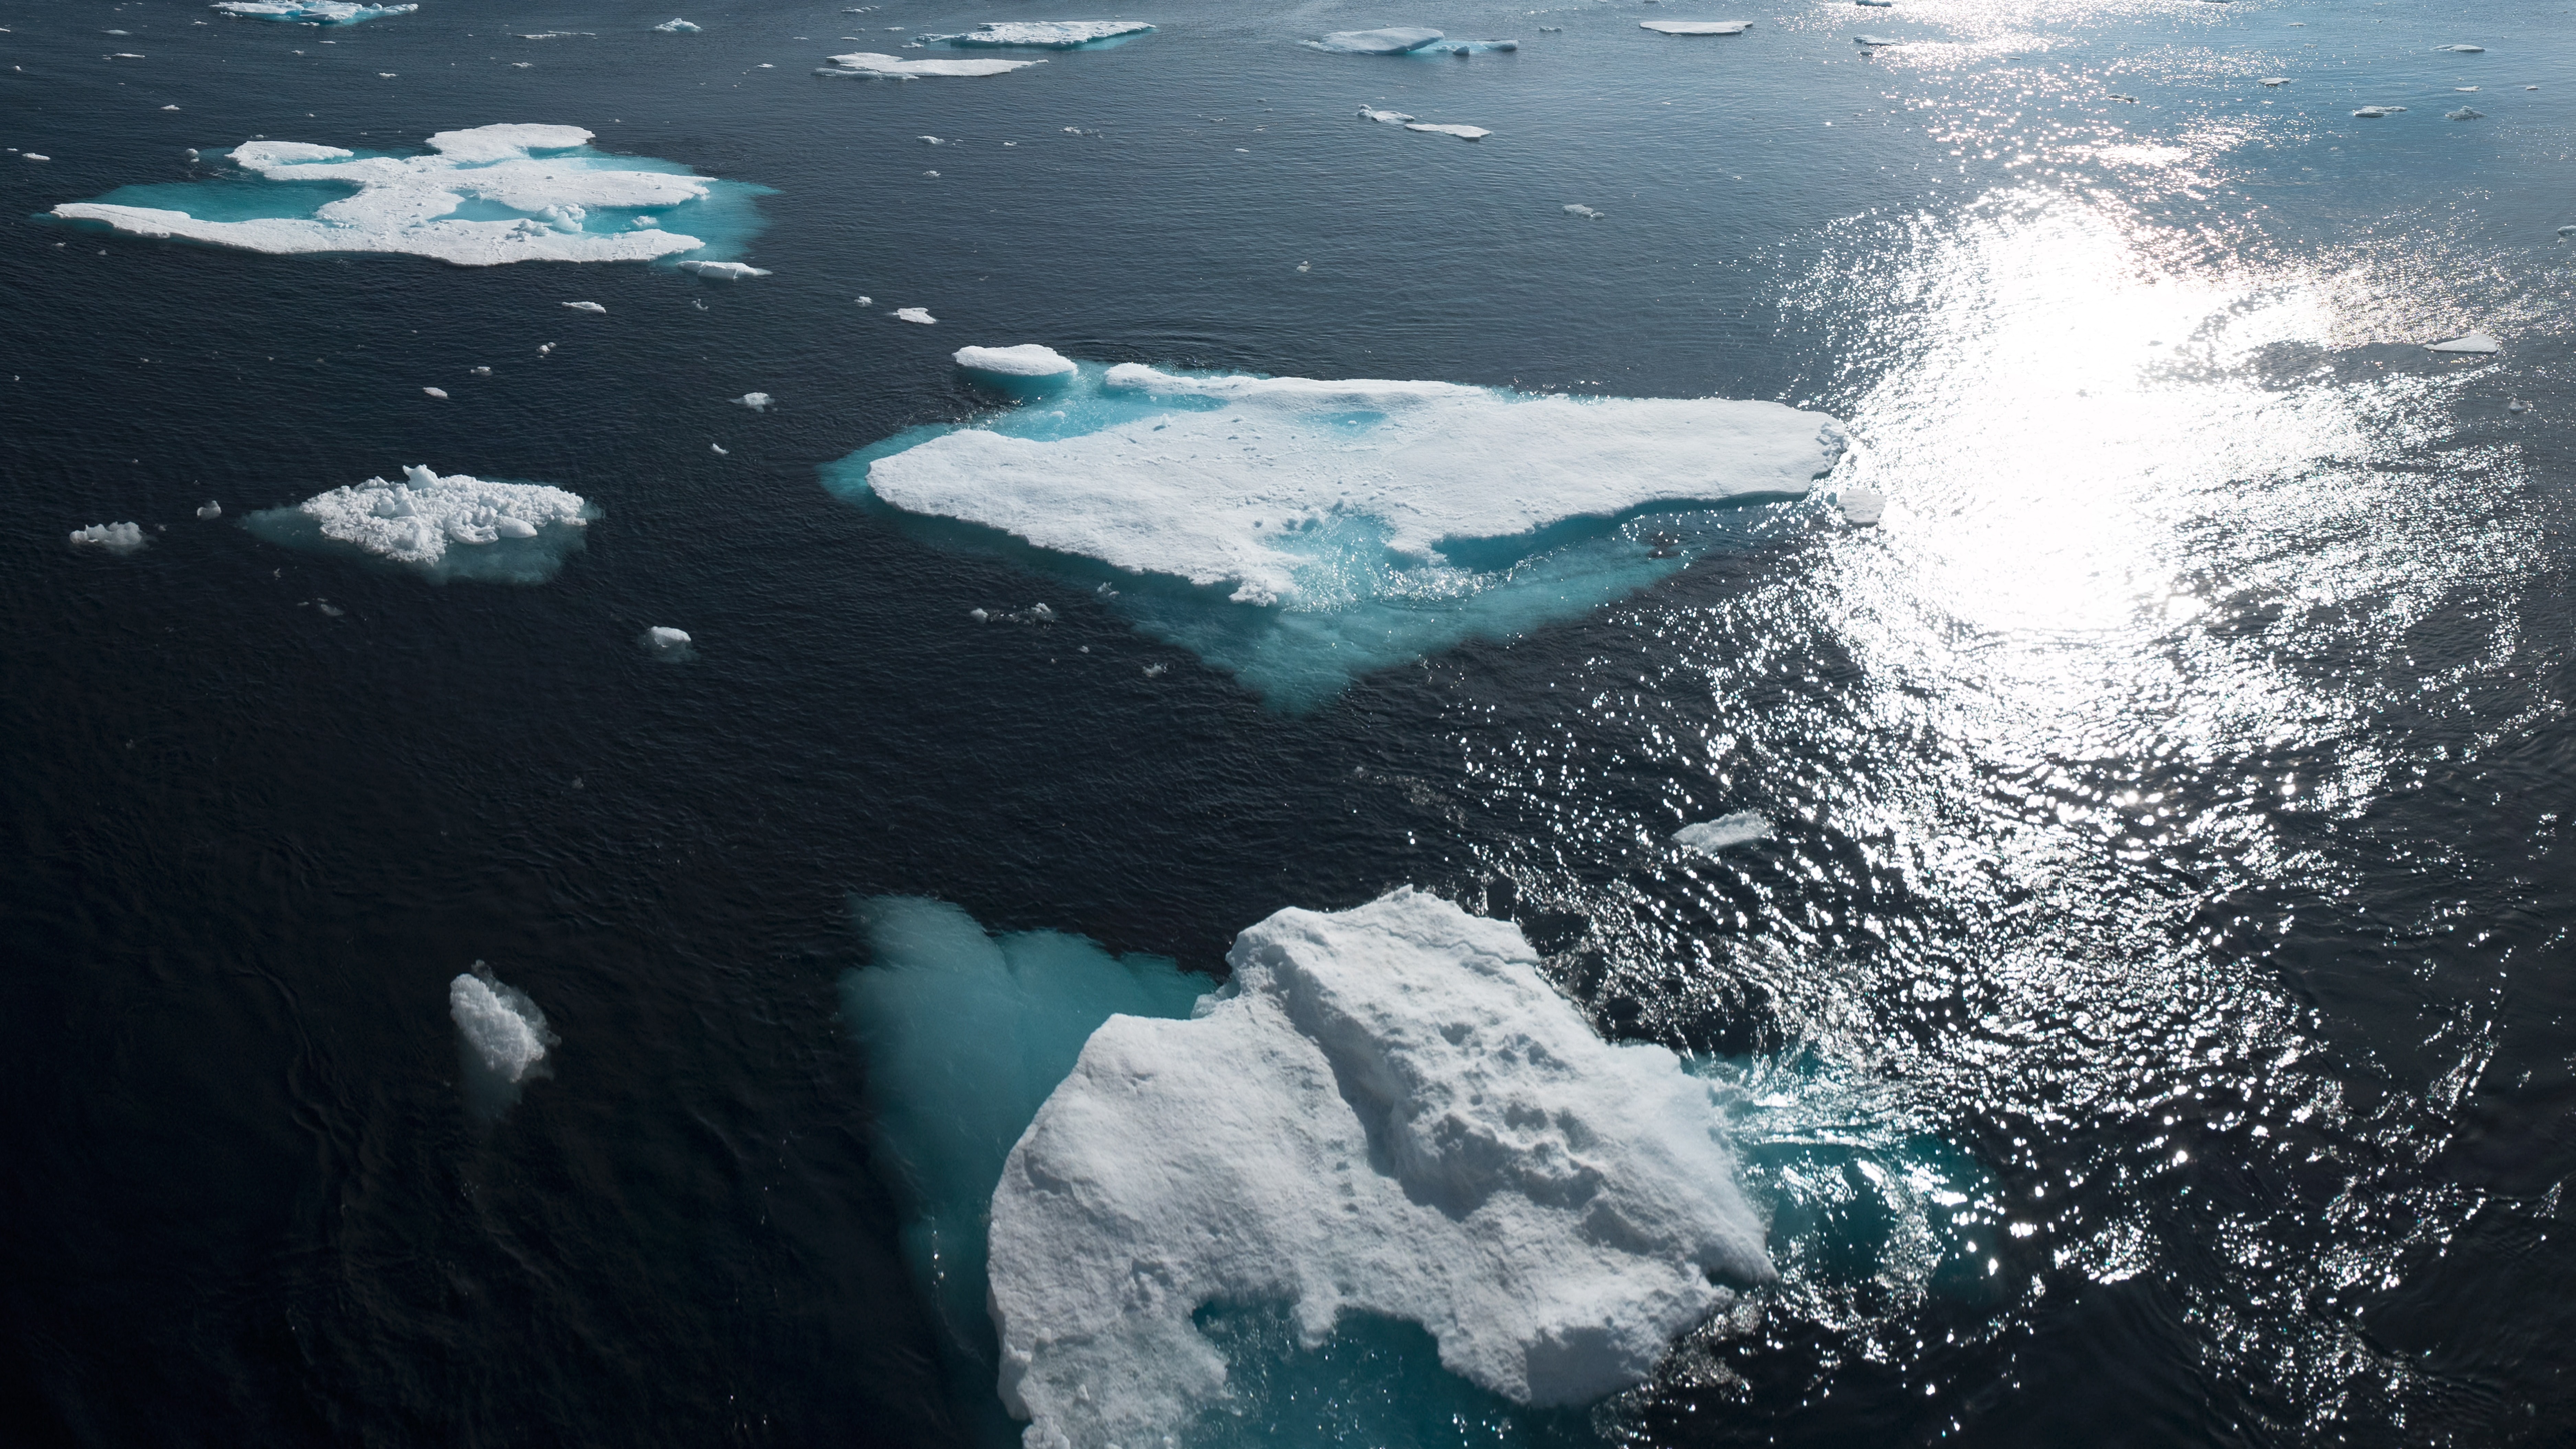 An aerial view of Greenland’s ocean with icebergs and sunlight on the water